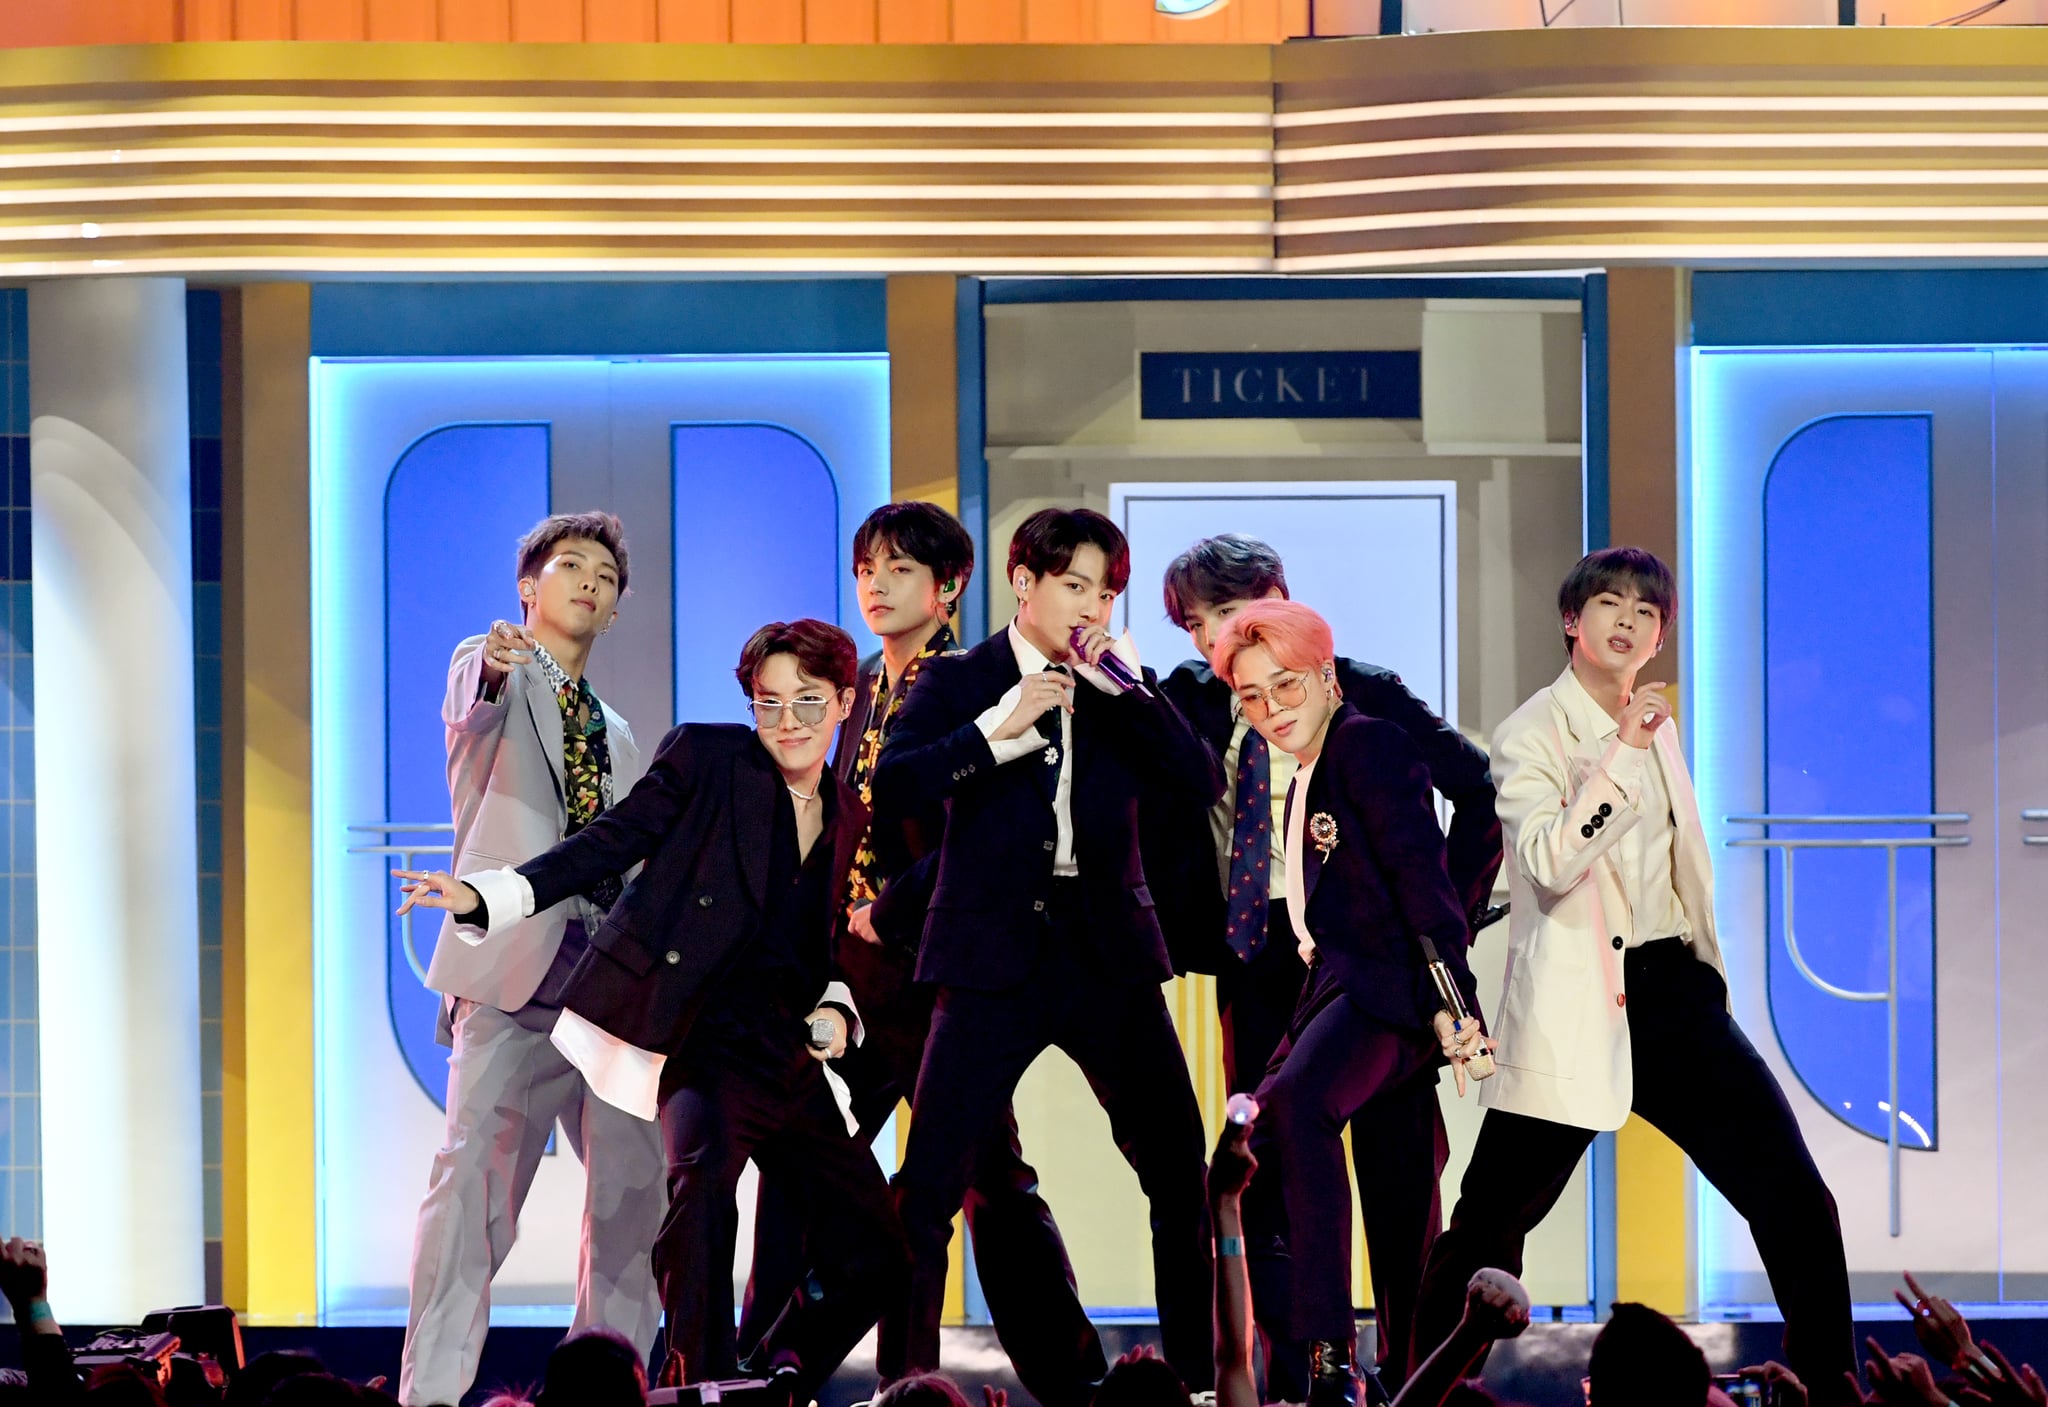 LAS VEGAS, NEVADA - MAY 01: BTS perform onstage during the 2019 Billboard Music Awards at MGM Grand Garden Arena on May 01, 2019 in Las Vegas, Nevada. (Photo by Kevin Winter/Getty Images for dcp)